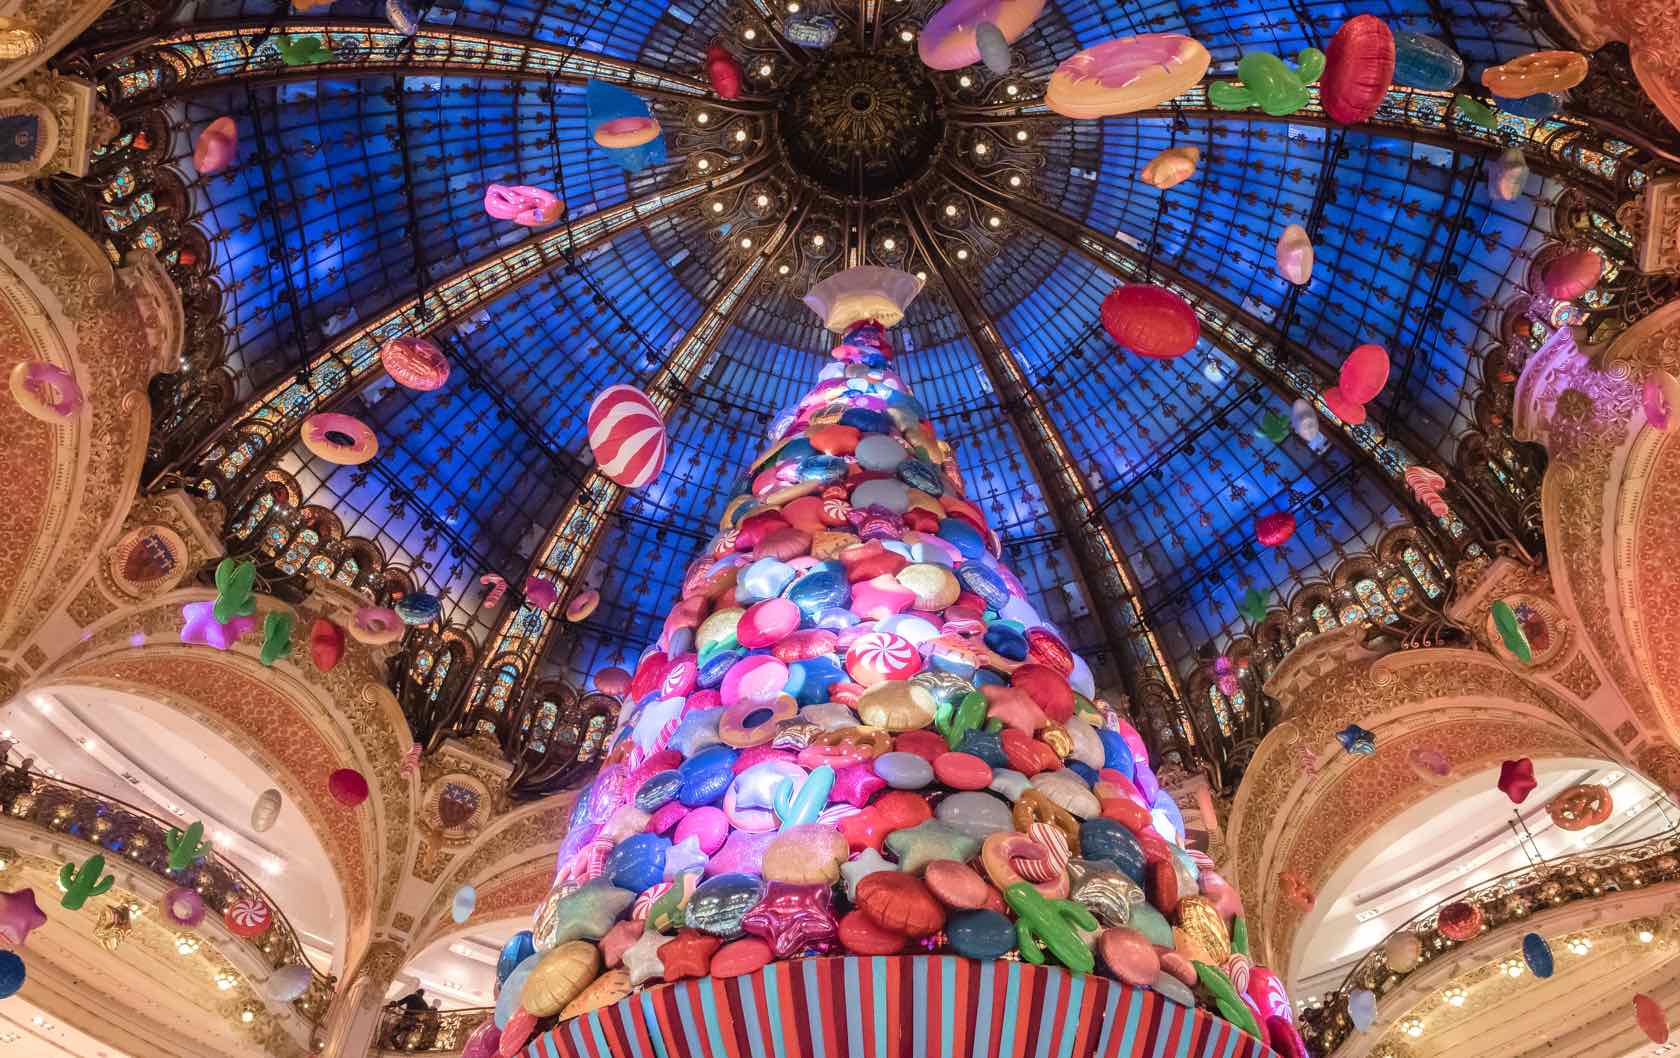 Guided Tour of the Galeries Lafayette in Paris 